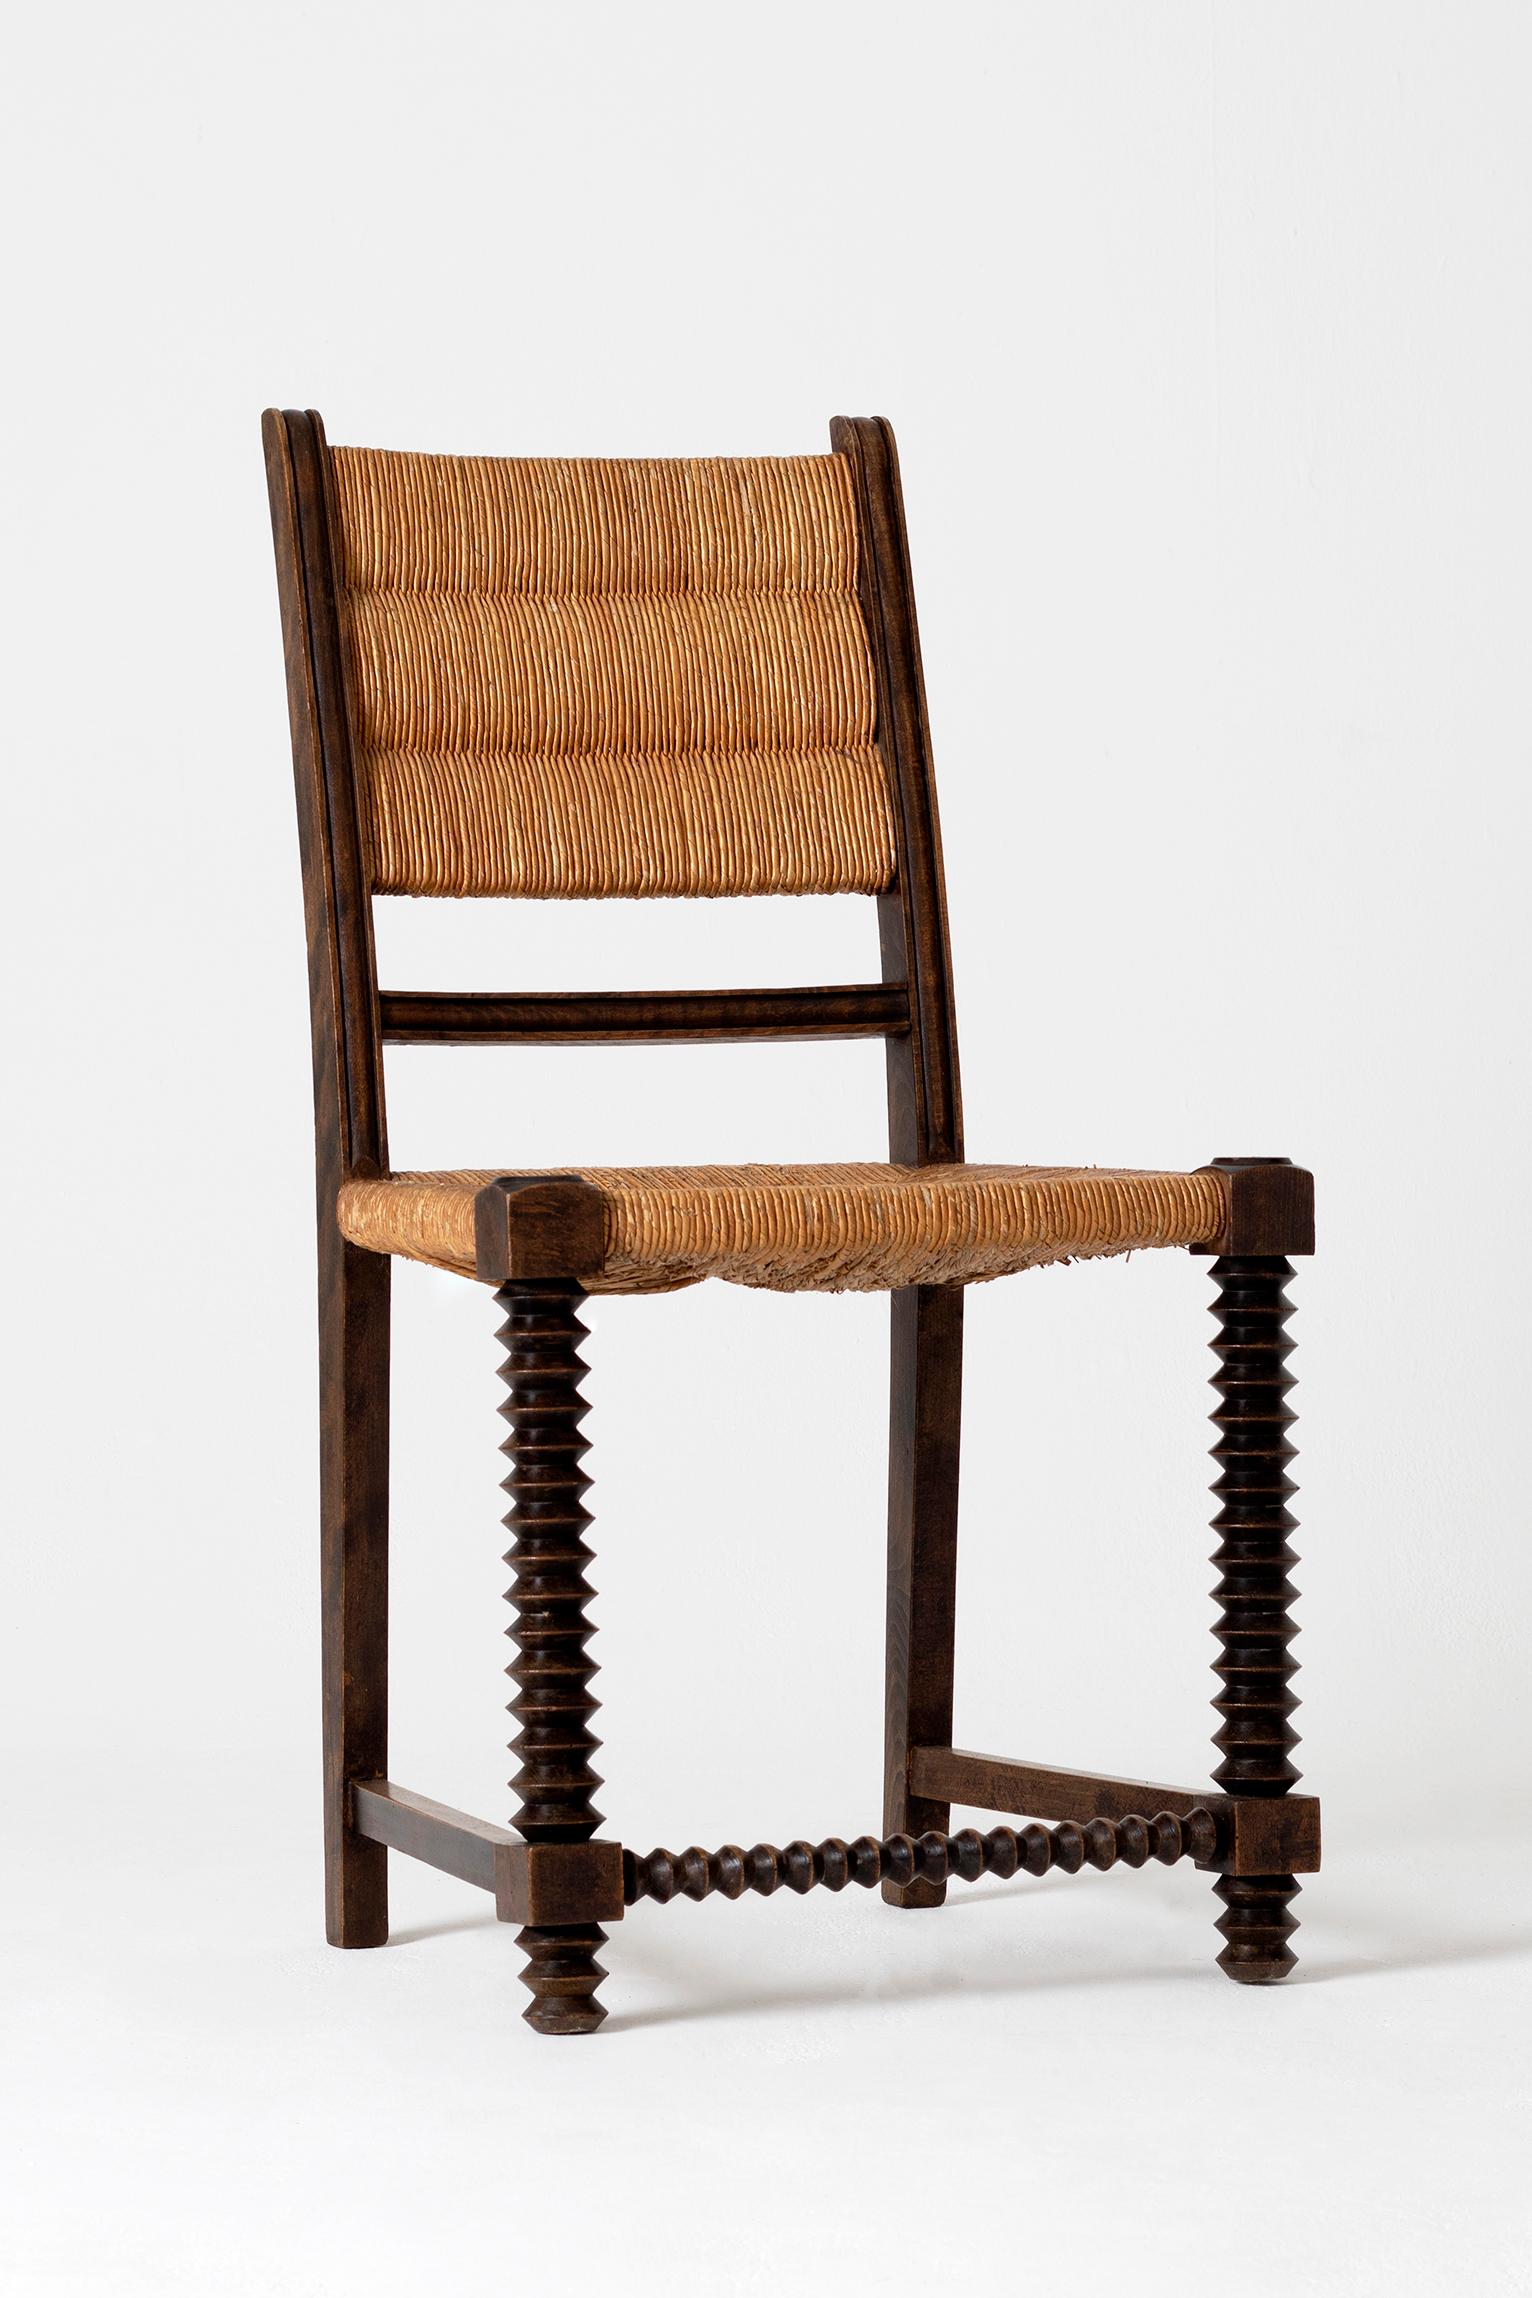 An Art Deco stained oak and straw chair, by Victor Courtray (1896-1987).
France, circa 1940.